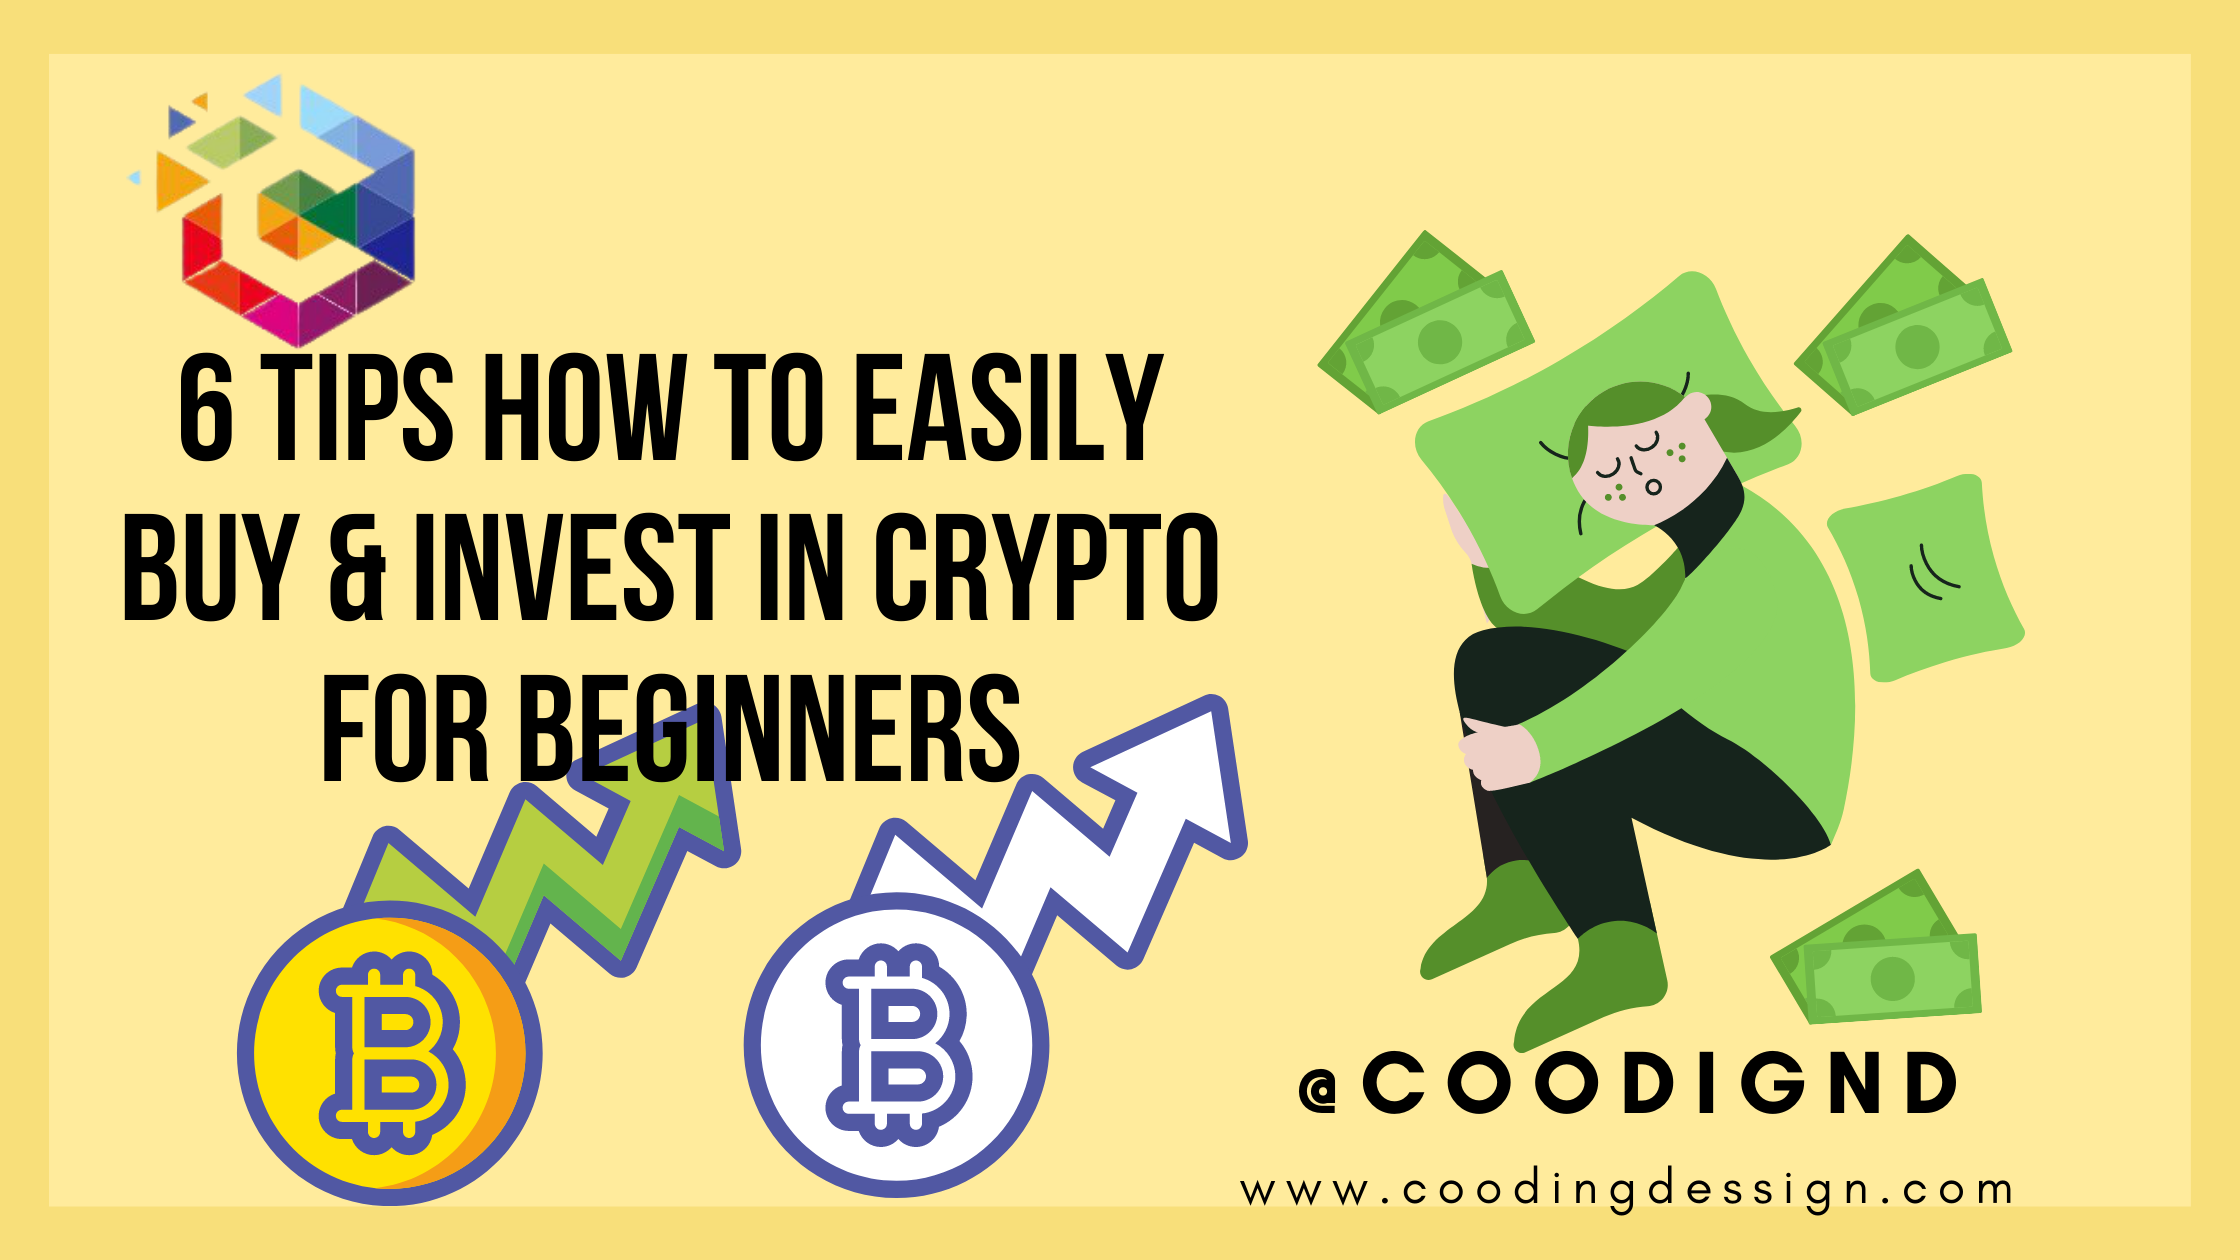 6 Tips how to easily buy & invest in crypto for beginners